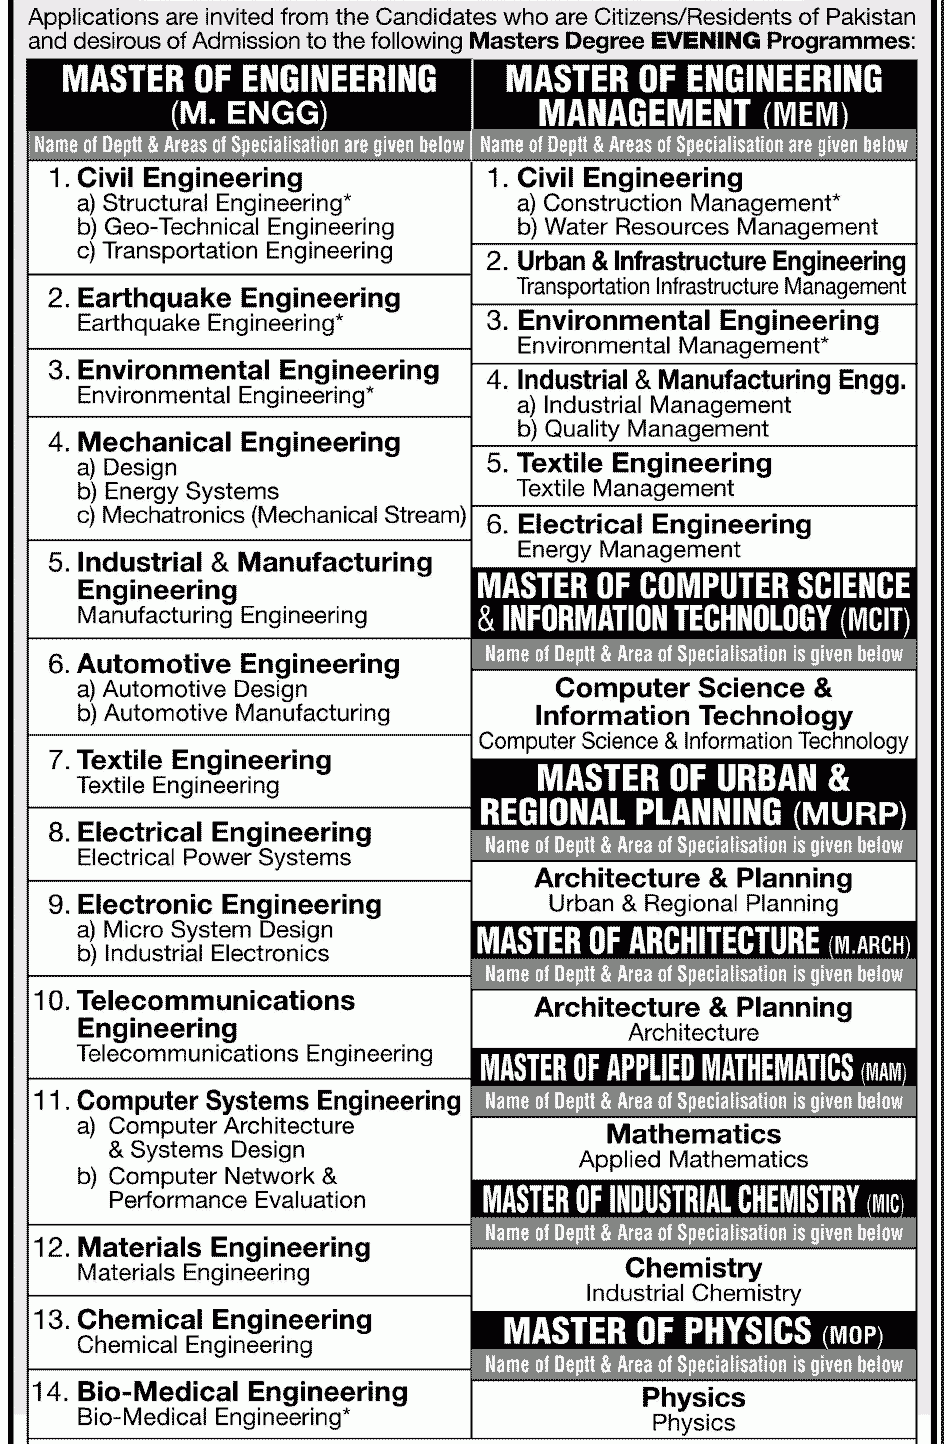 NED UET Admission Notice for Master Degree Programmes